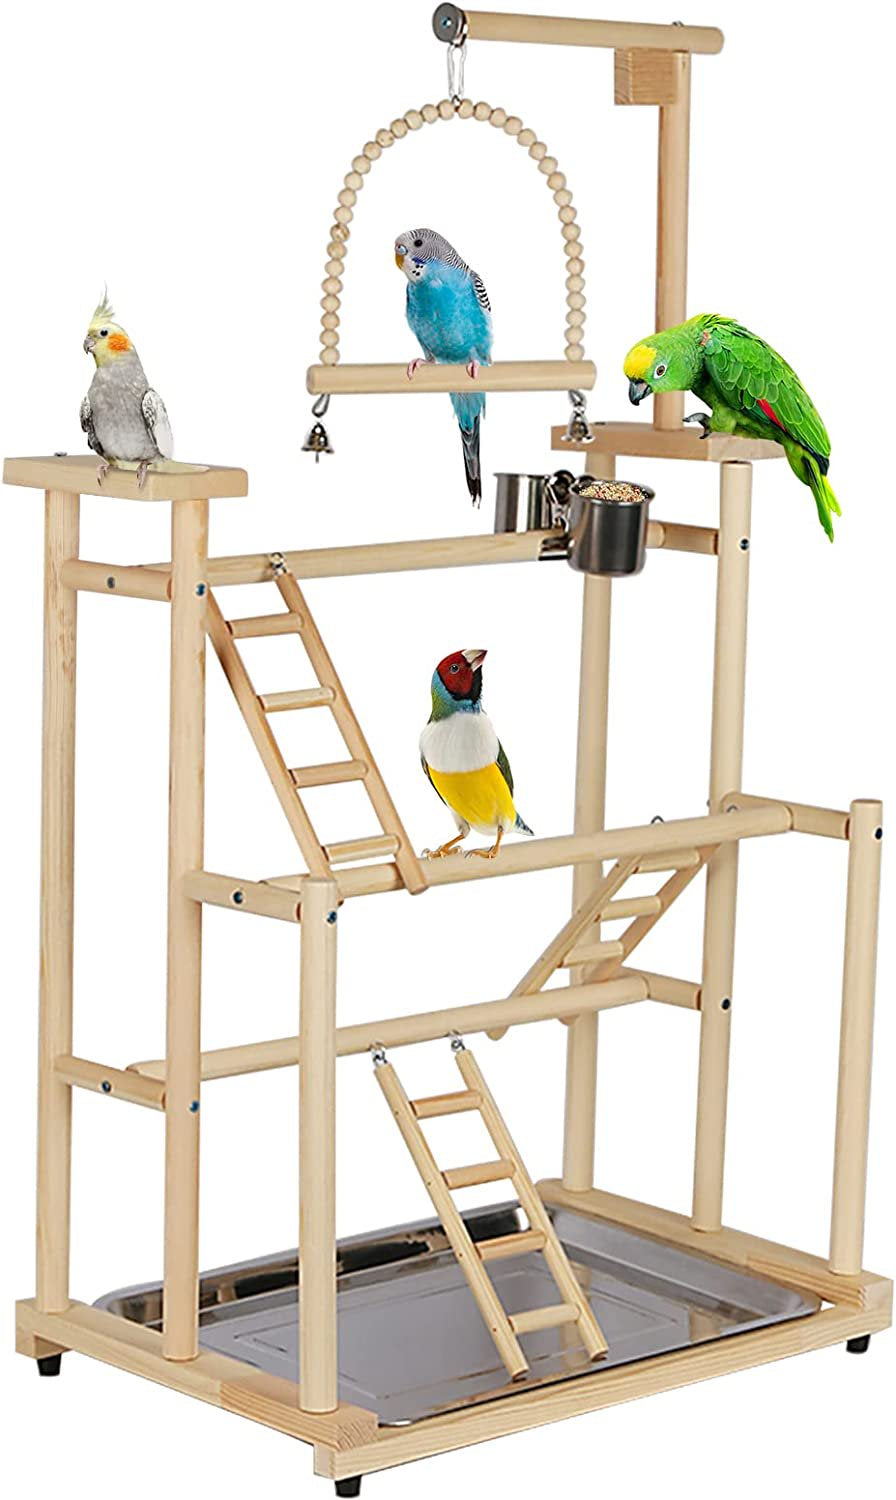 JSHHH 3 Layers Wood Bird Playground Large Parrot Playstand Bird Perch Stand Bird Gym Playground Playpen for Cockatiel Parakeet Parrot (With Installation Notes)